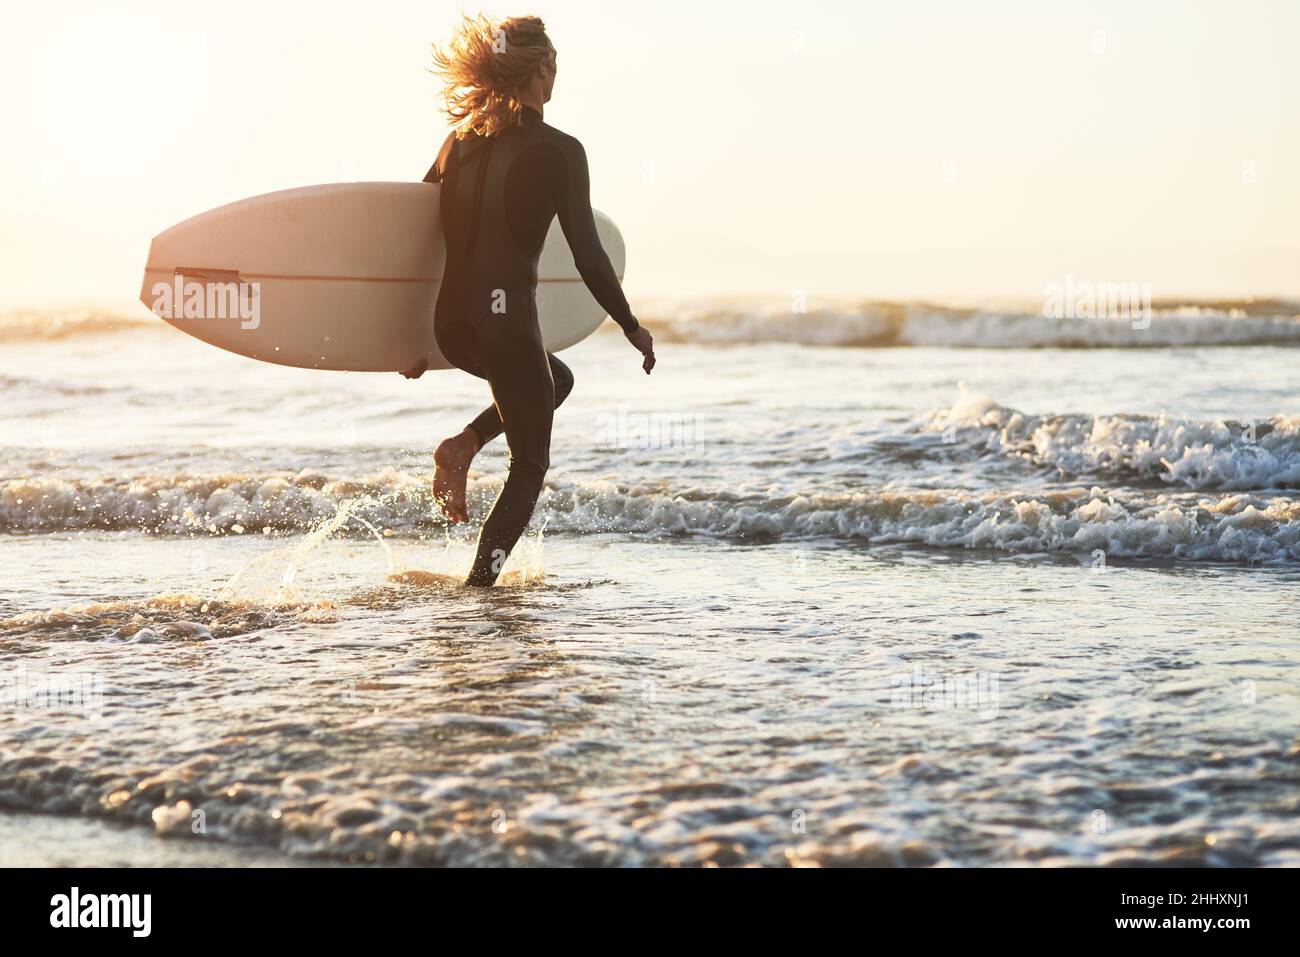 Break free from the world. Rearview shot of a young man surfing at the beach. Stock Photo